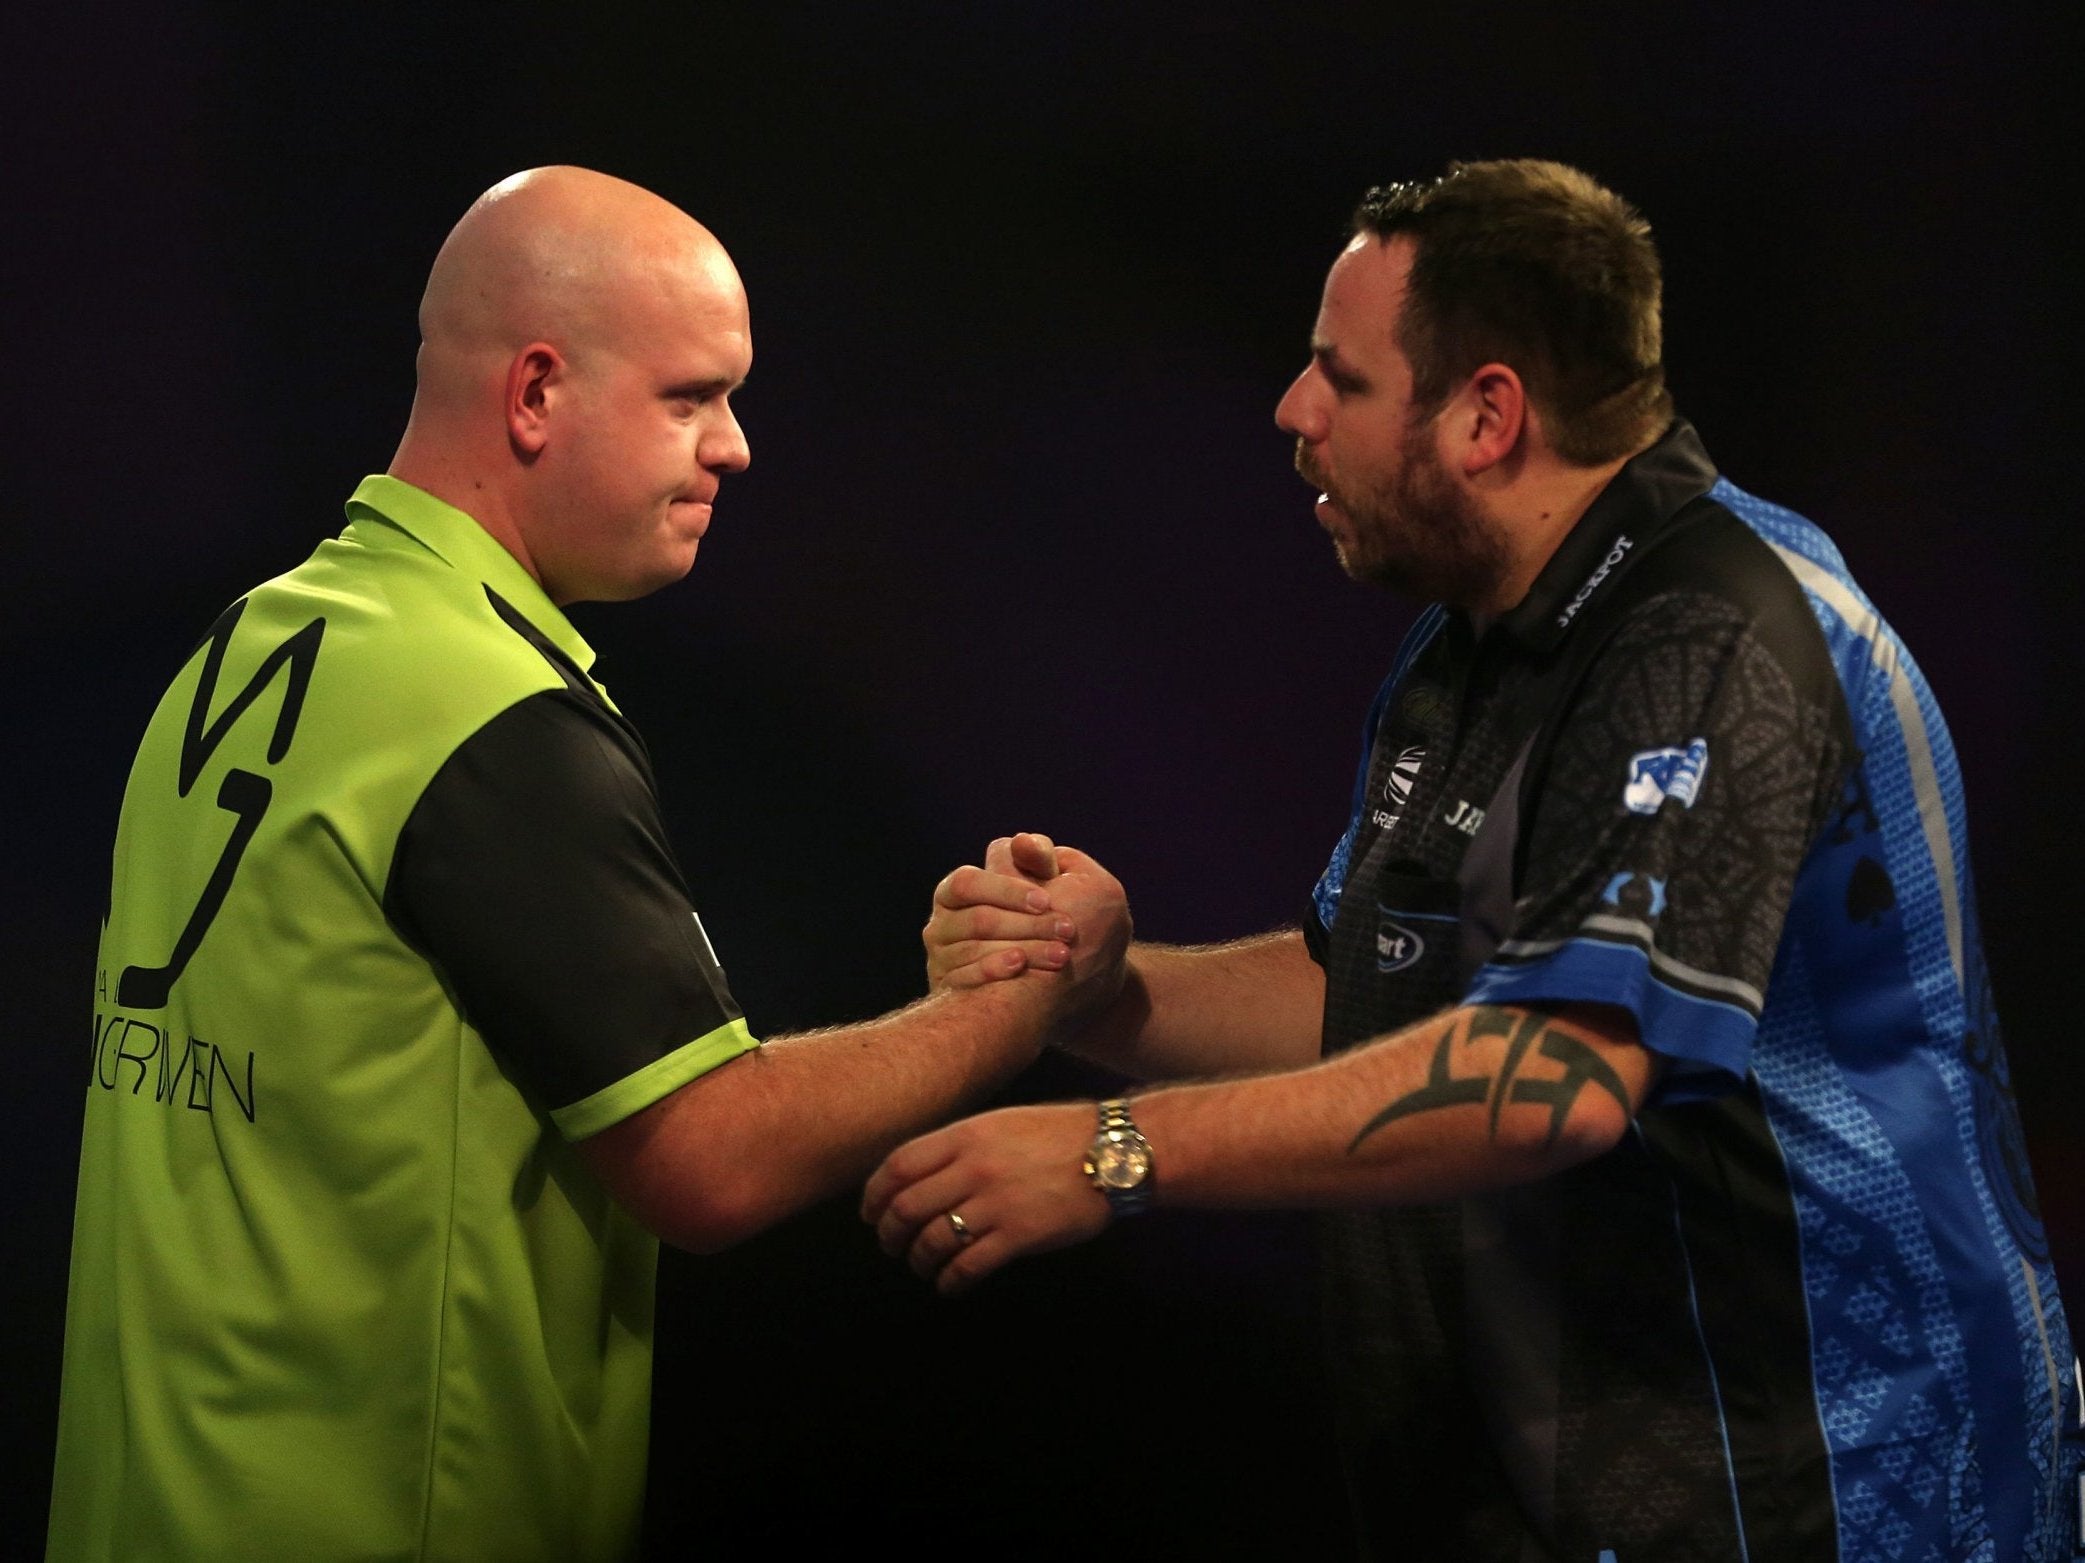 Lewis pushed Van Gerwen all the way despite the 4-1 defeat as the Dutchman produced his very best